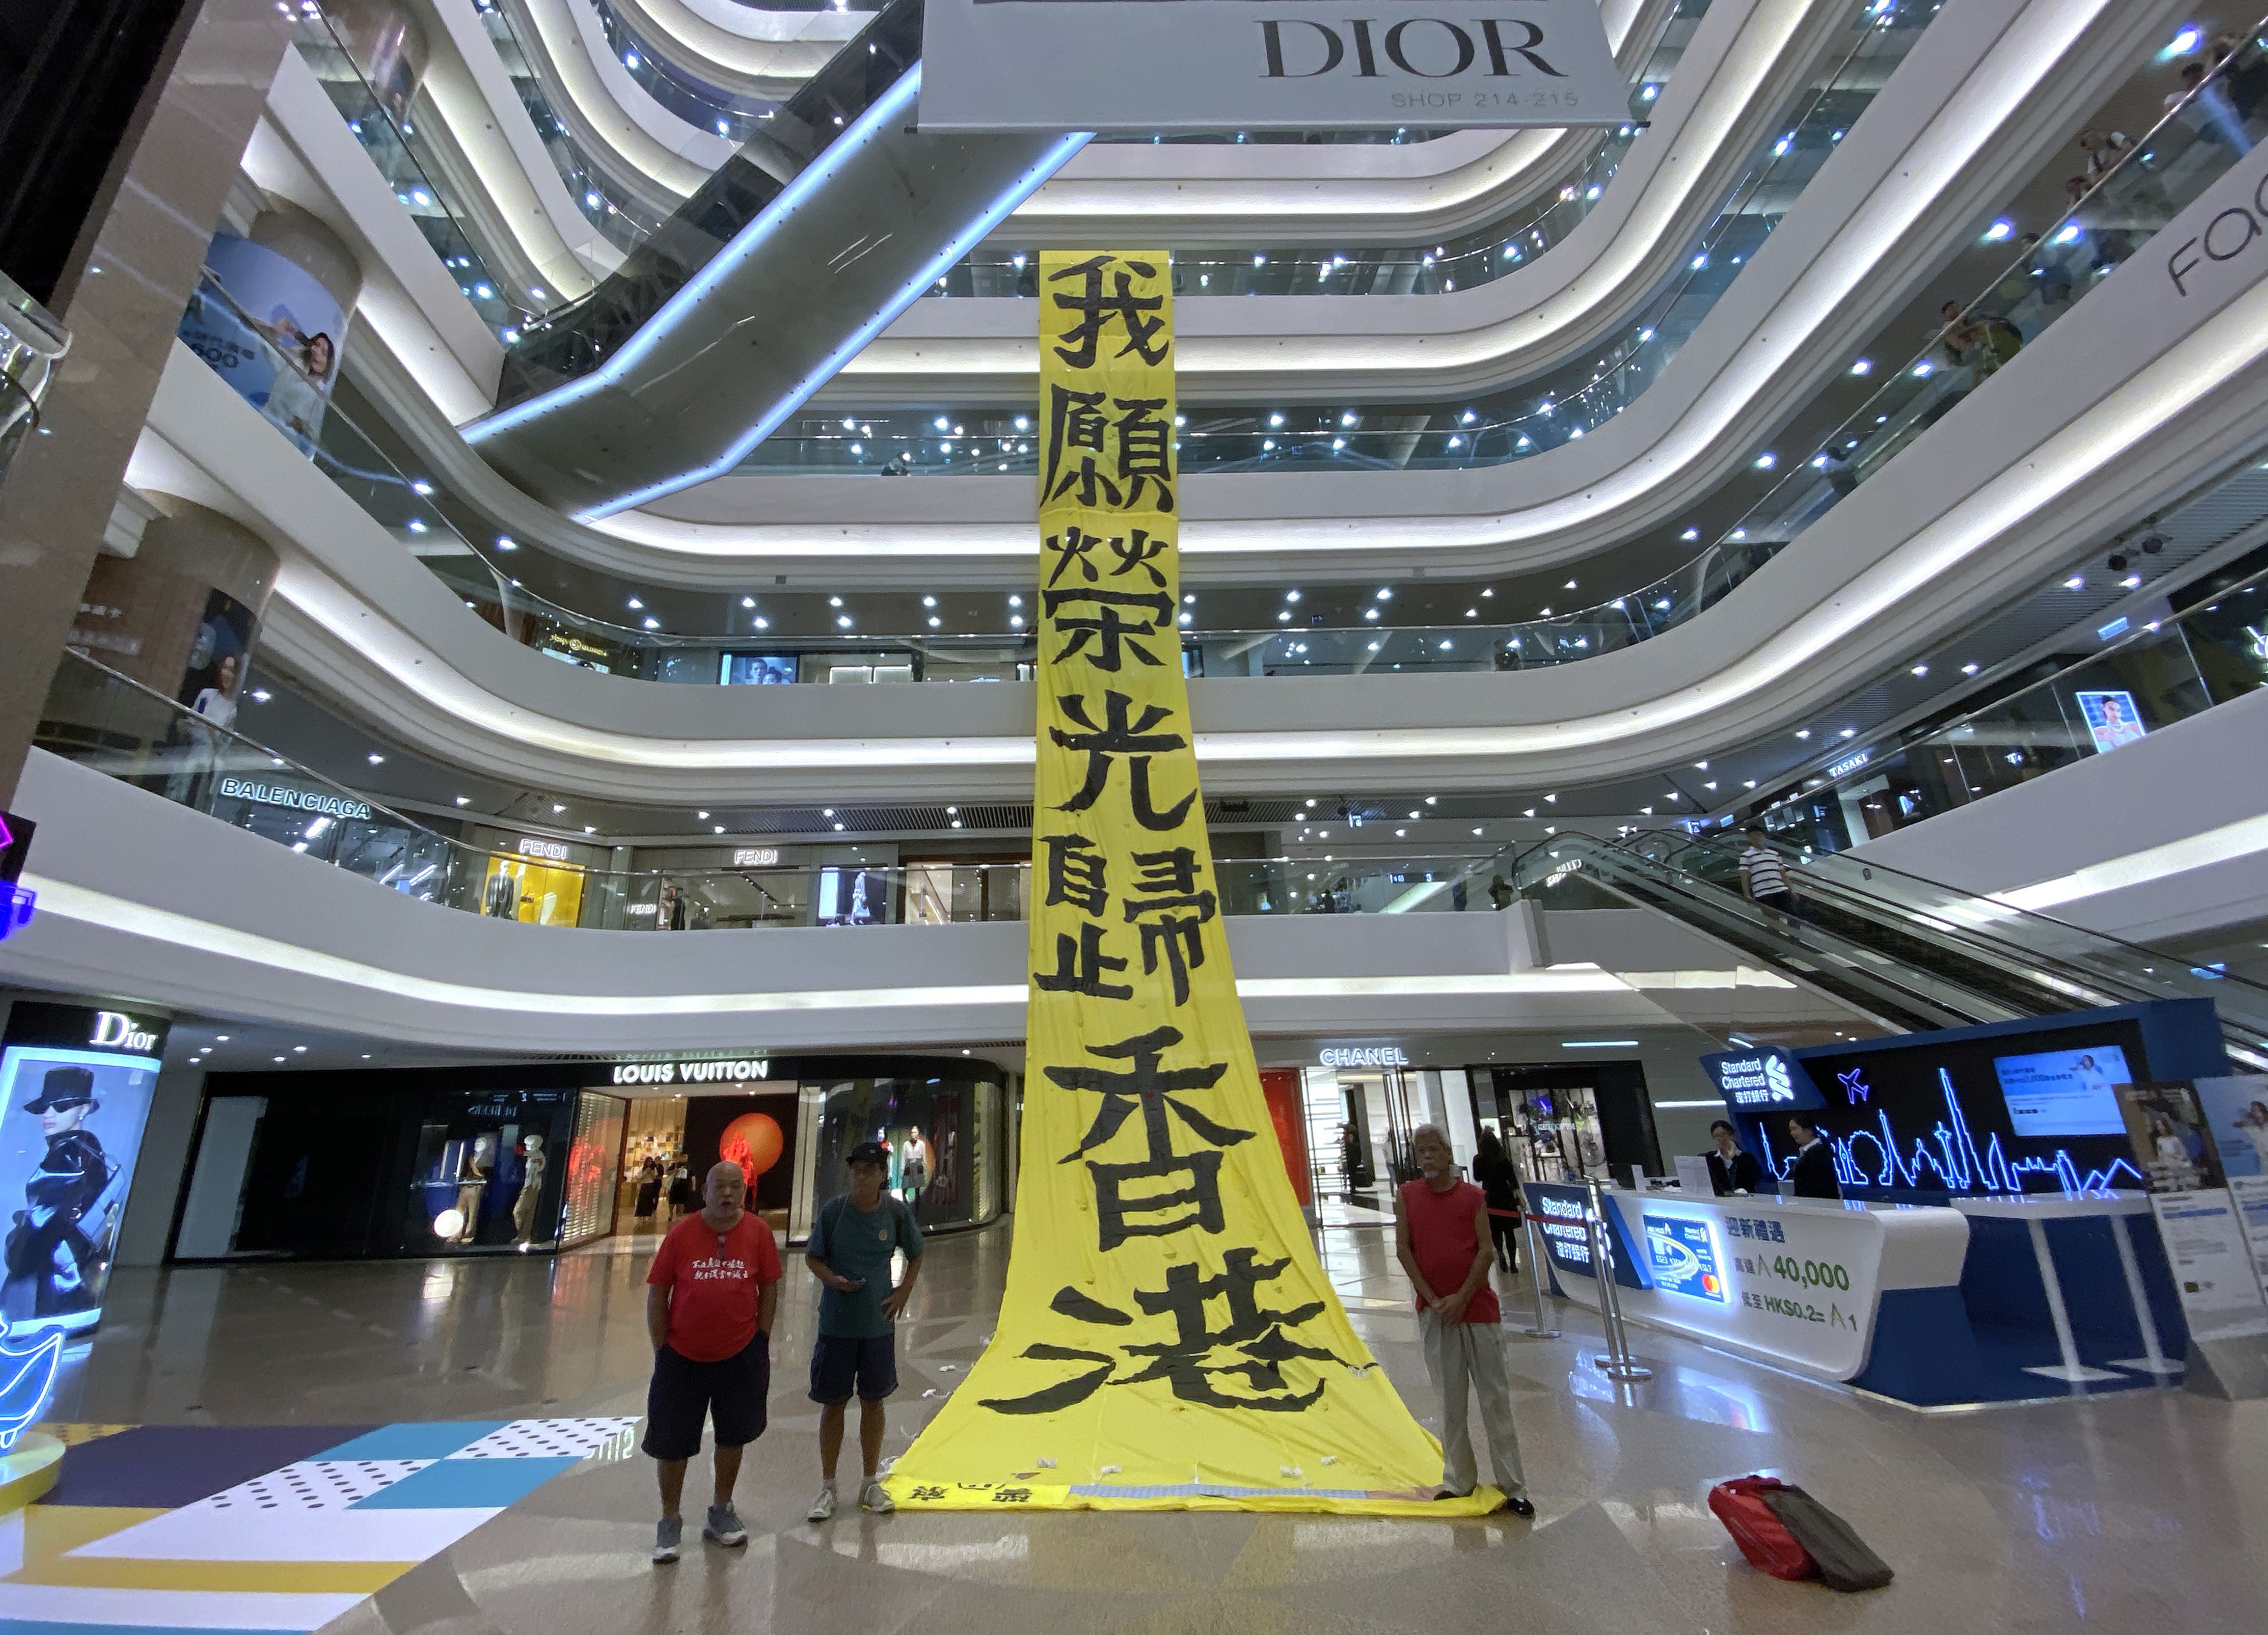 Hong Kong Protests Force Louis Vuitton To Close A Store; Will More Follow  Its Lead?